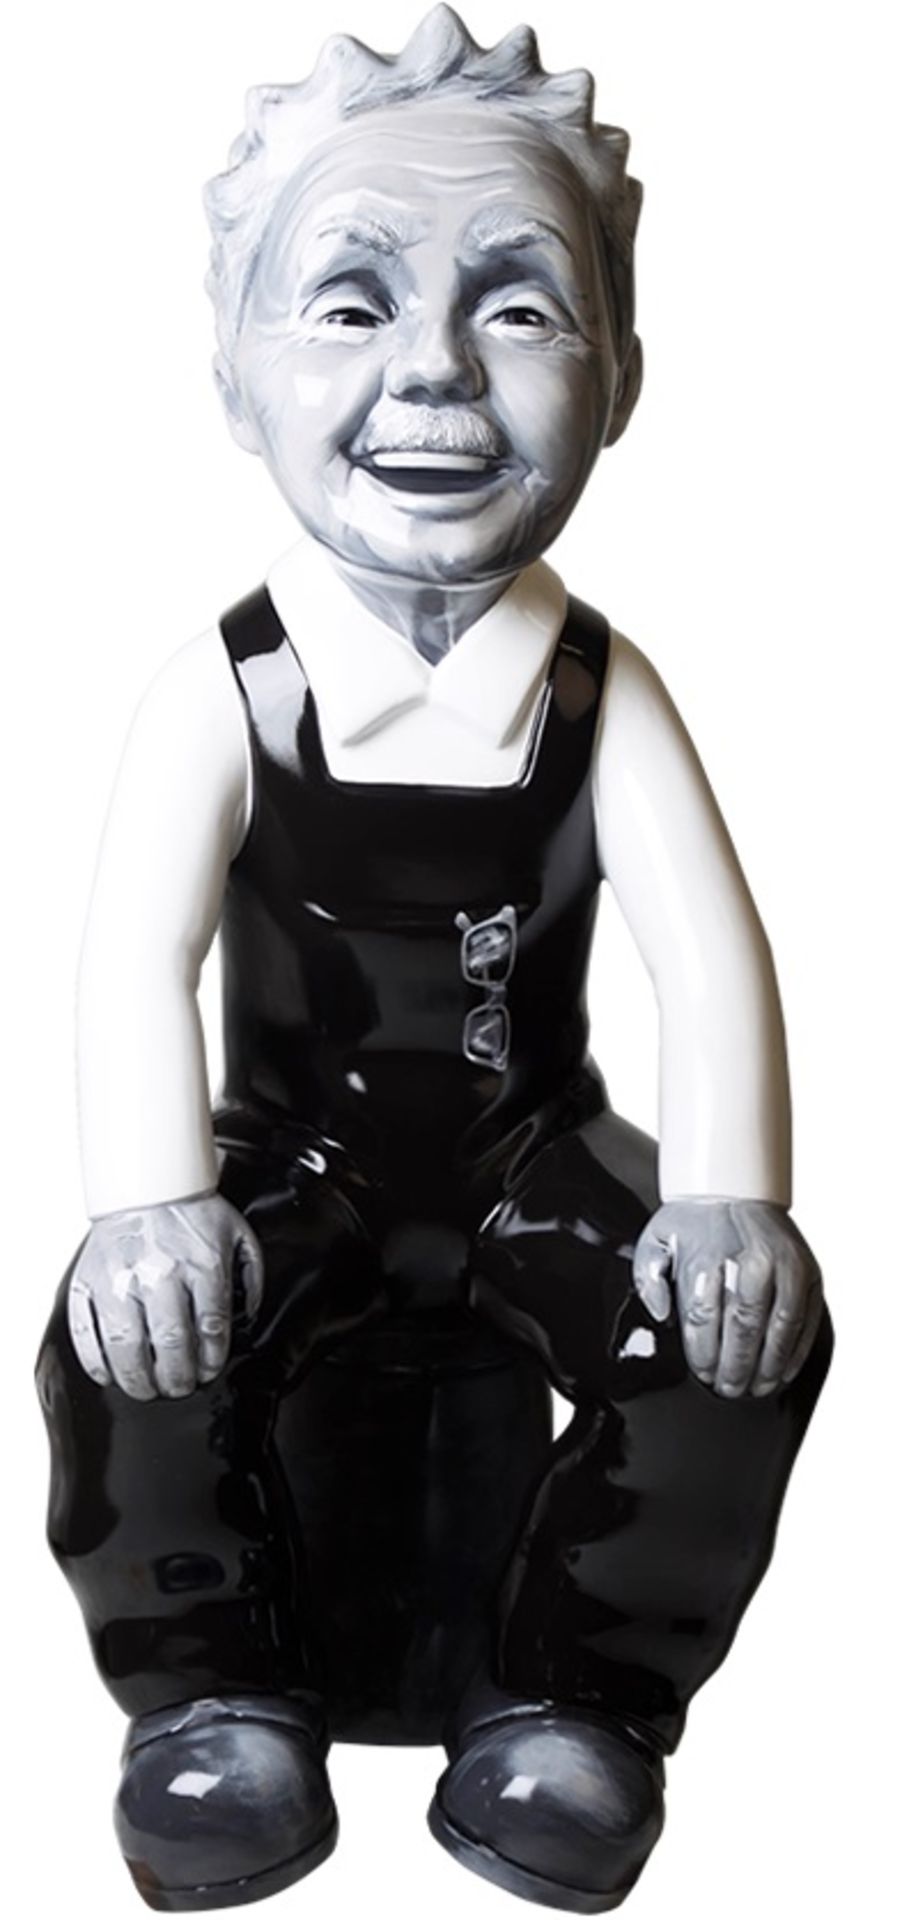 OOR WULLIE NOO - DESIGNED BY: ALISON PRICE - SPONSORED BY: BALHOUSIE CARE GROUP